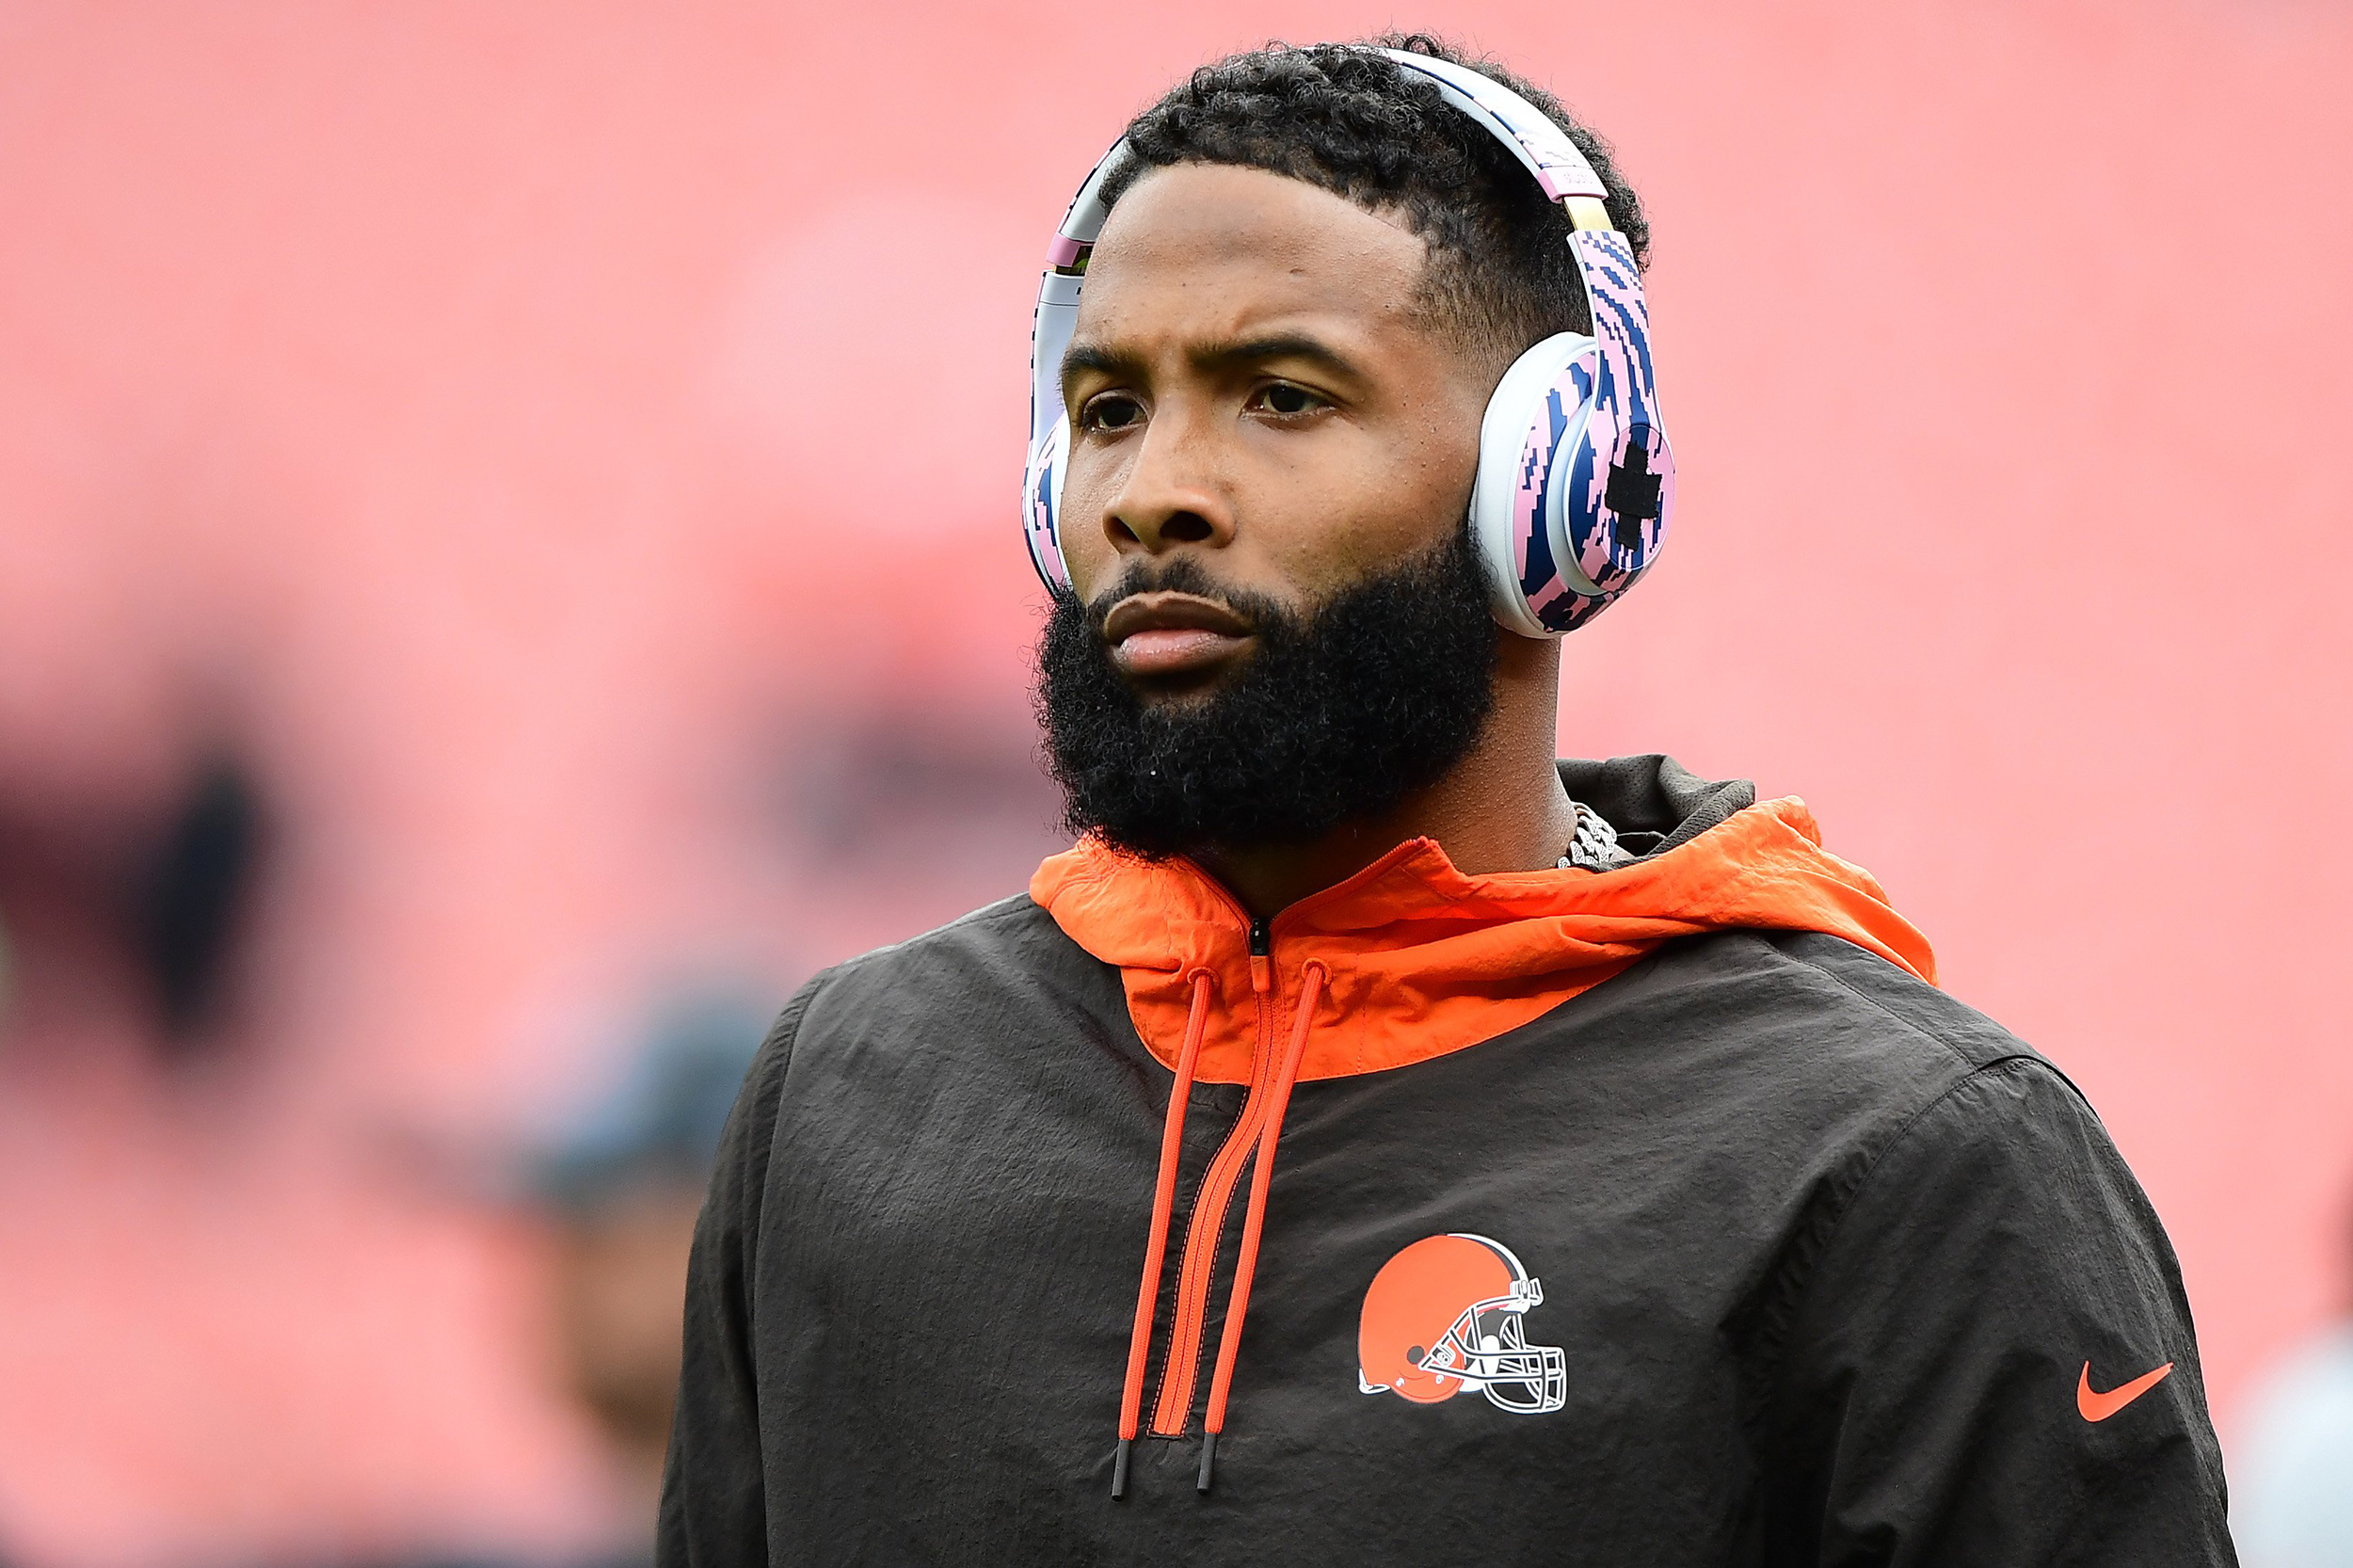 CLEVELAND BROWNS TO RELEASE ODELL BECKHAM JR DAYS AFTER FATHER'S VIDEO ...